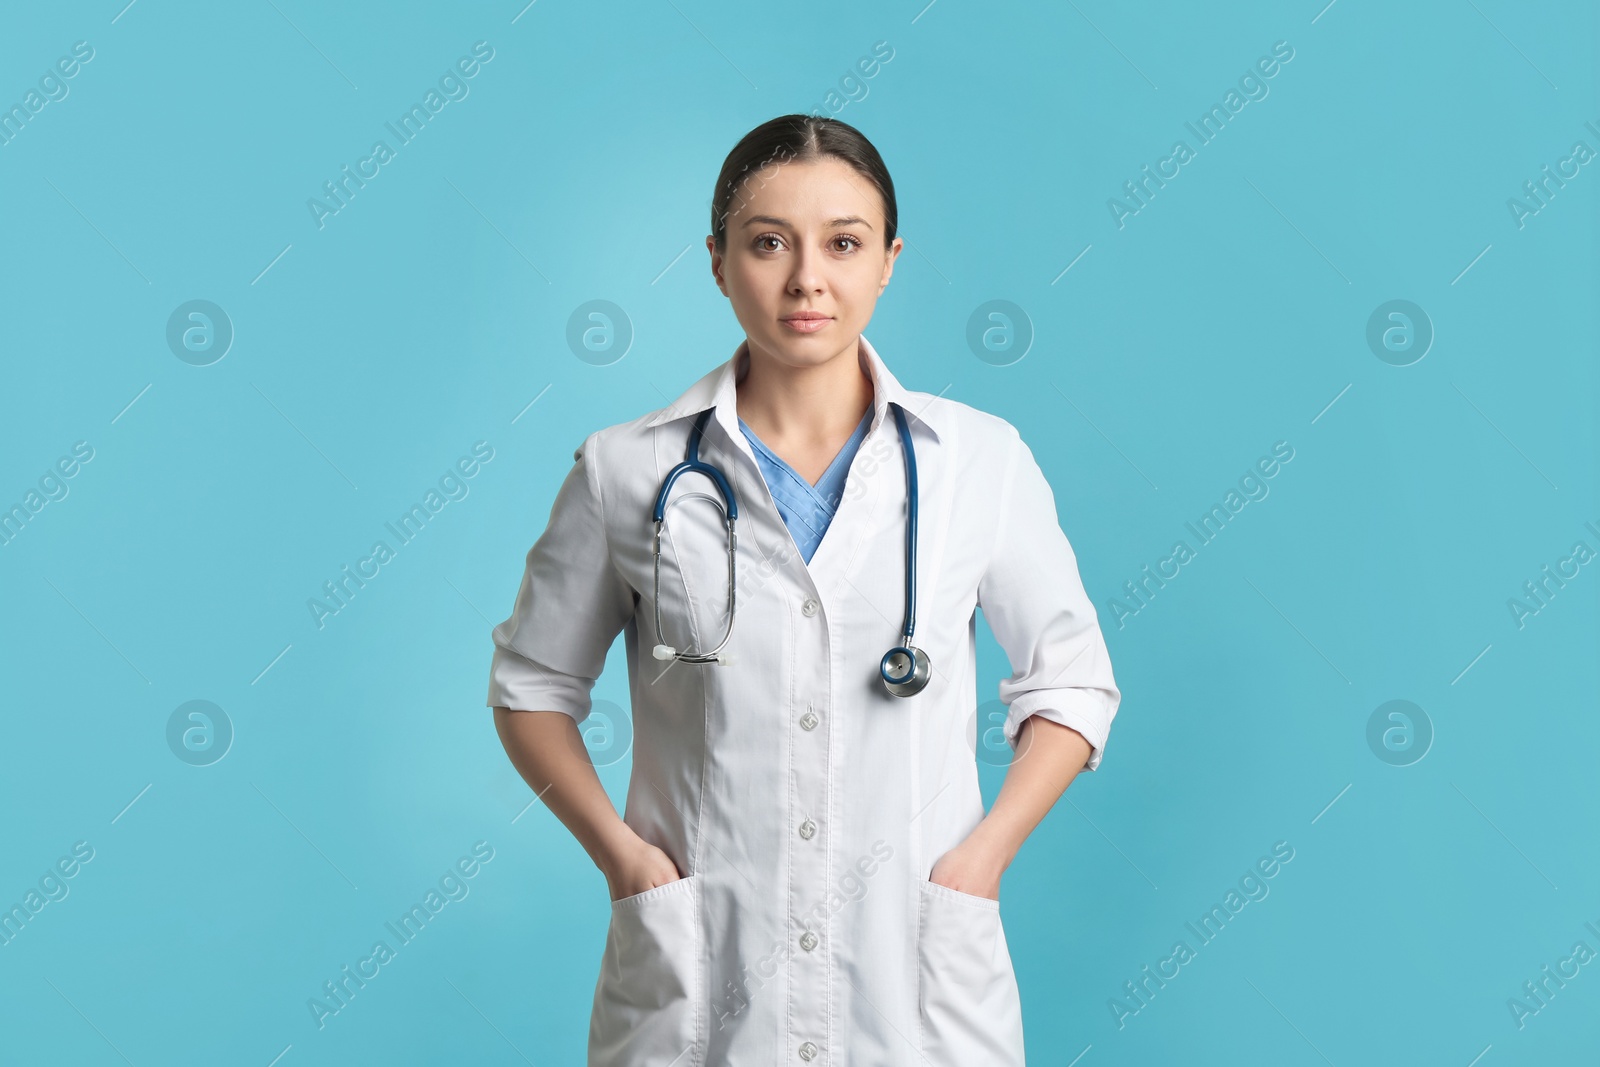 Photo of Pediatrician in uniform with stethoscope on turquoise background